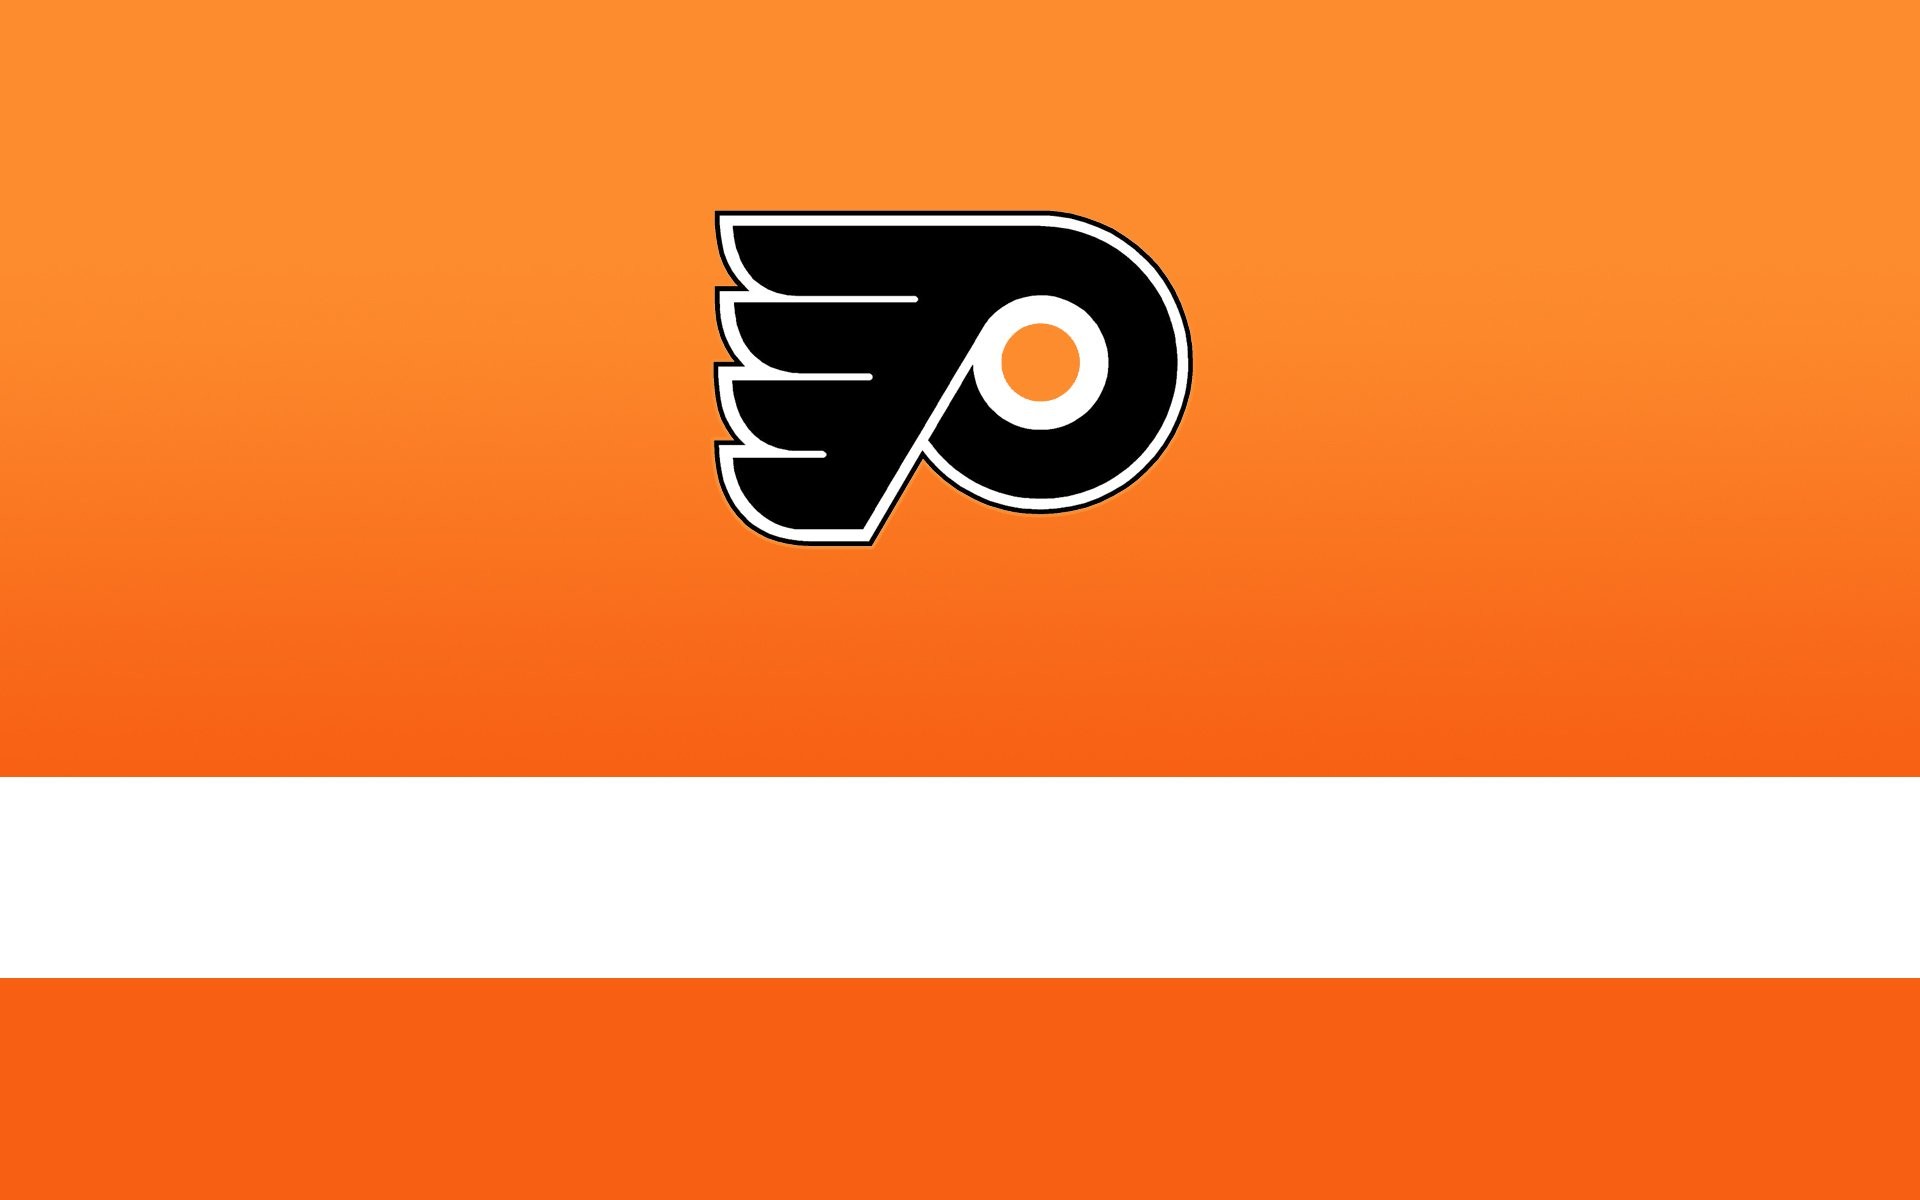 Flyers Logo Wallpapers (39 Wallpapers) – Adorable Wallpapers